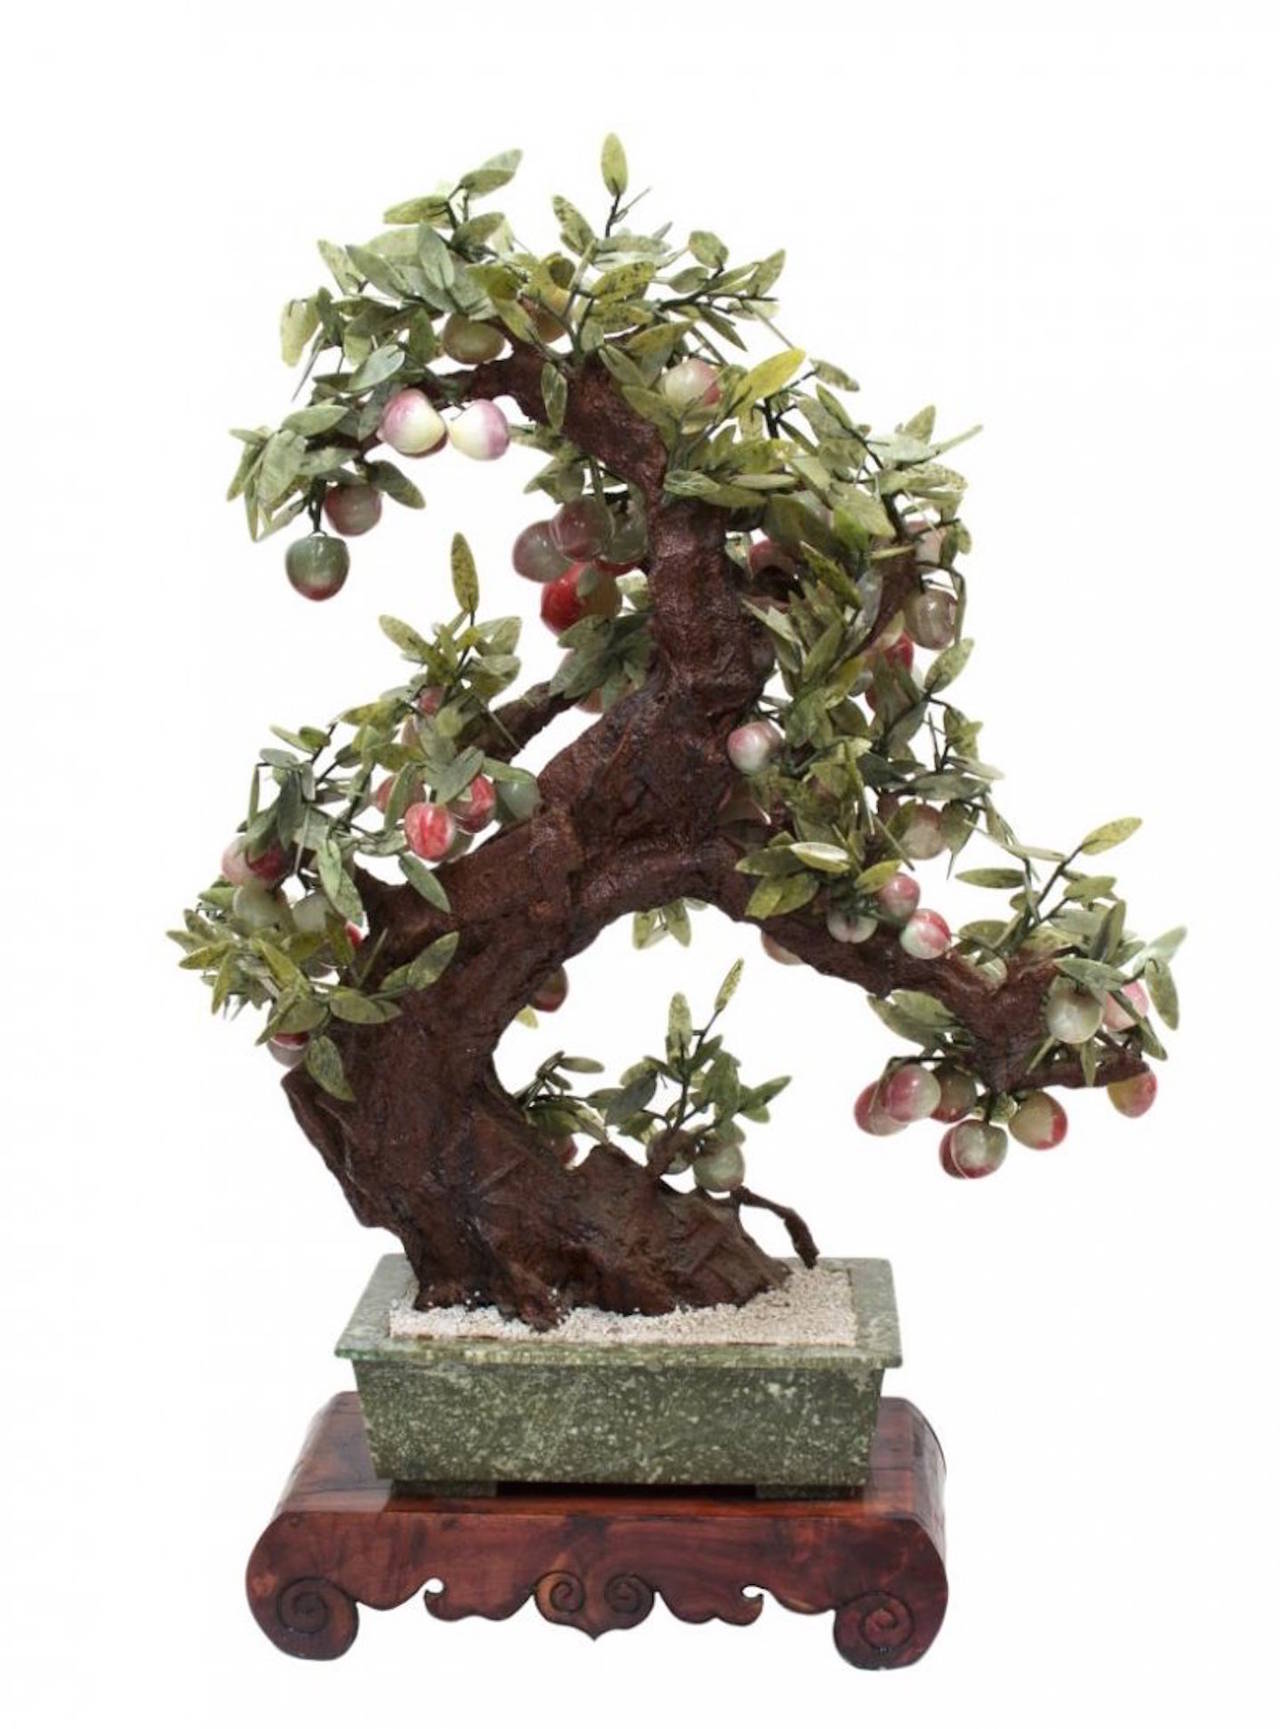 Monumental Chinese Hardstone Peach Tree, with Jade/ Jadeite  leaves and Peking Glass fruits on naturalistic tree trunk complete with large hardwood display stand